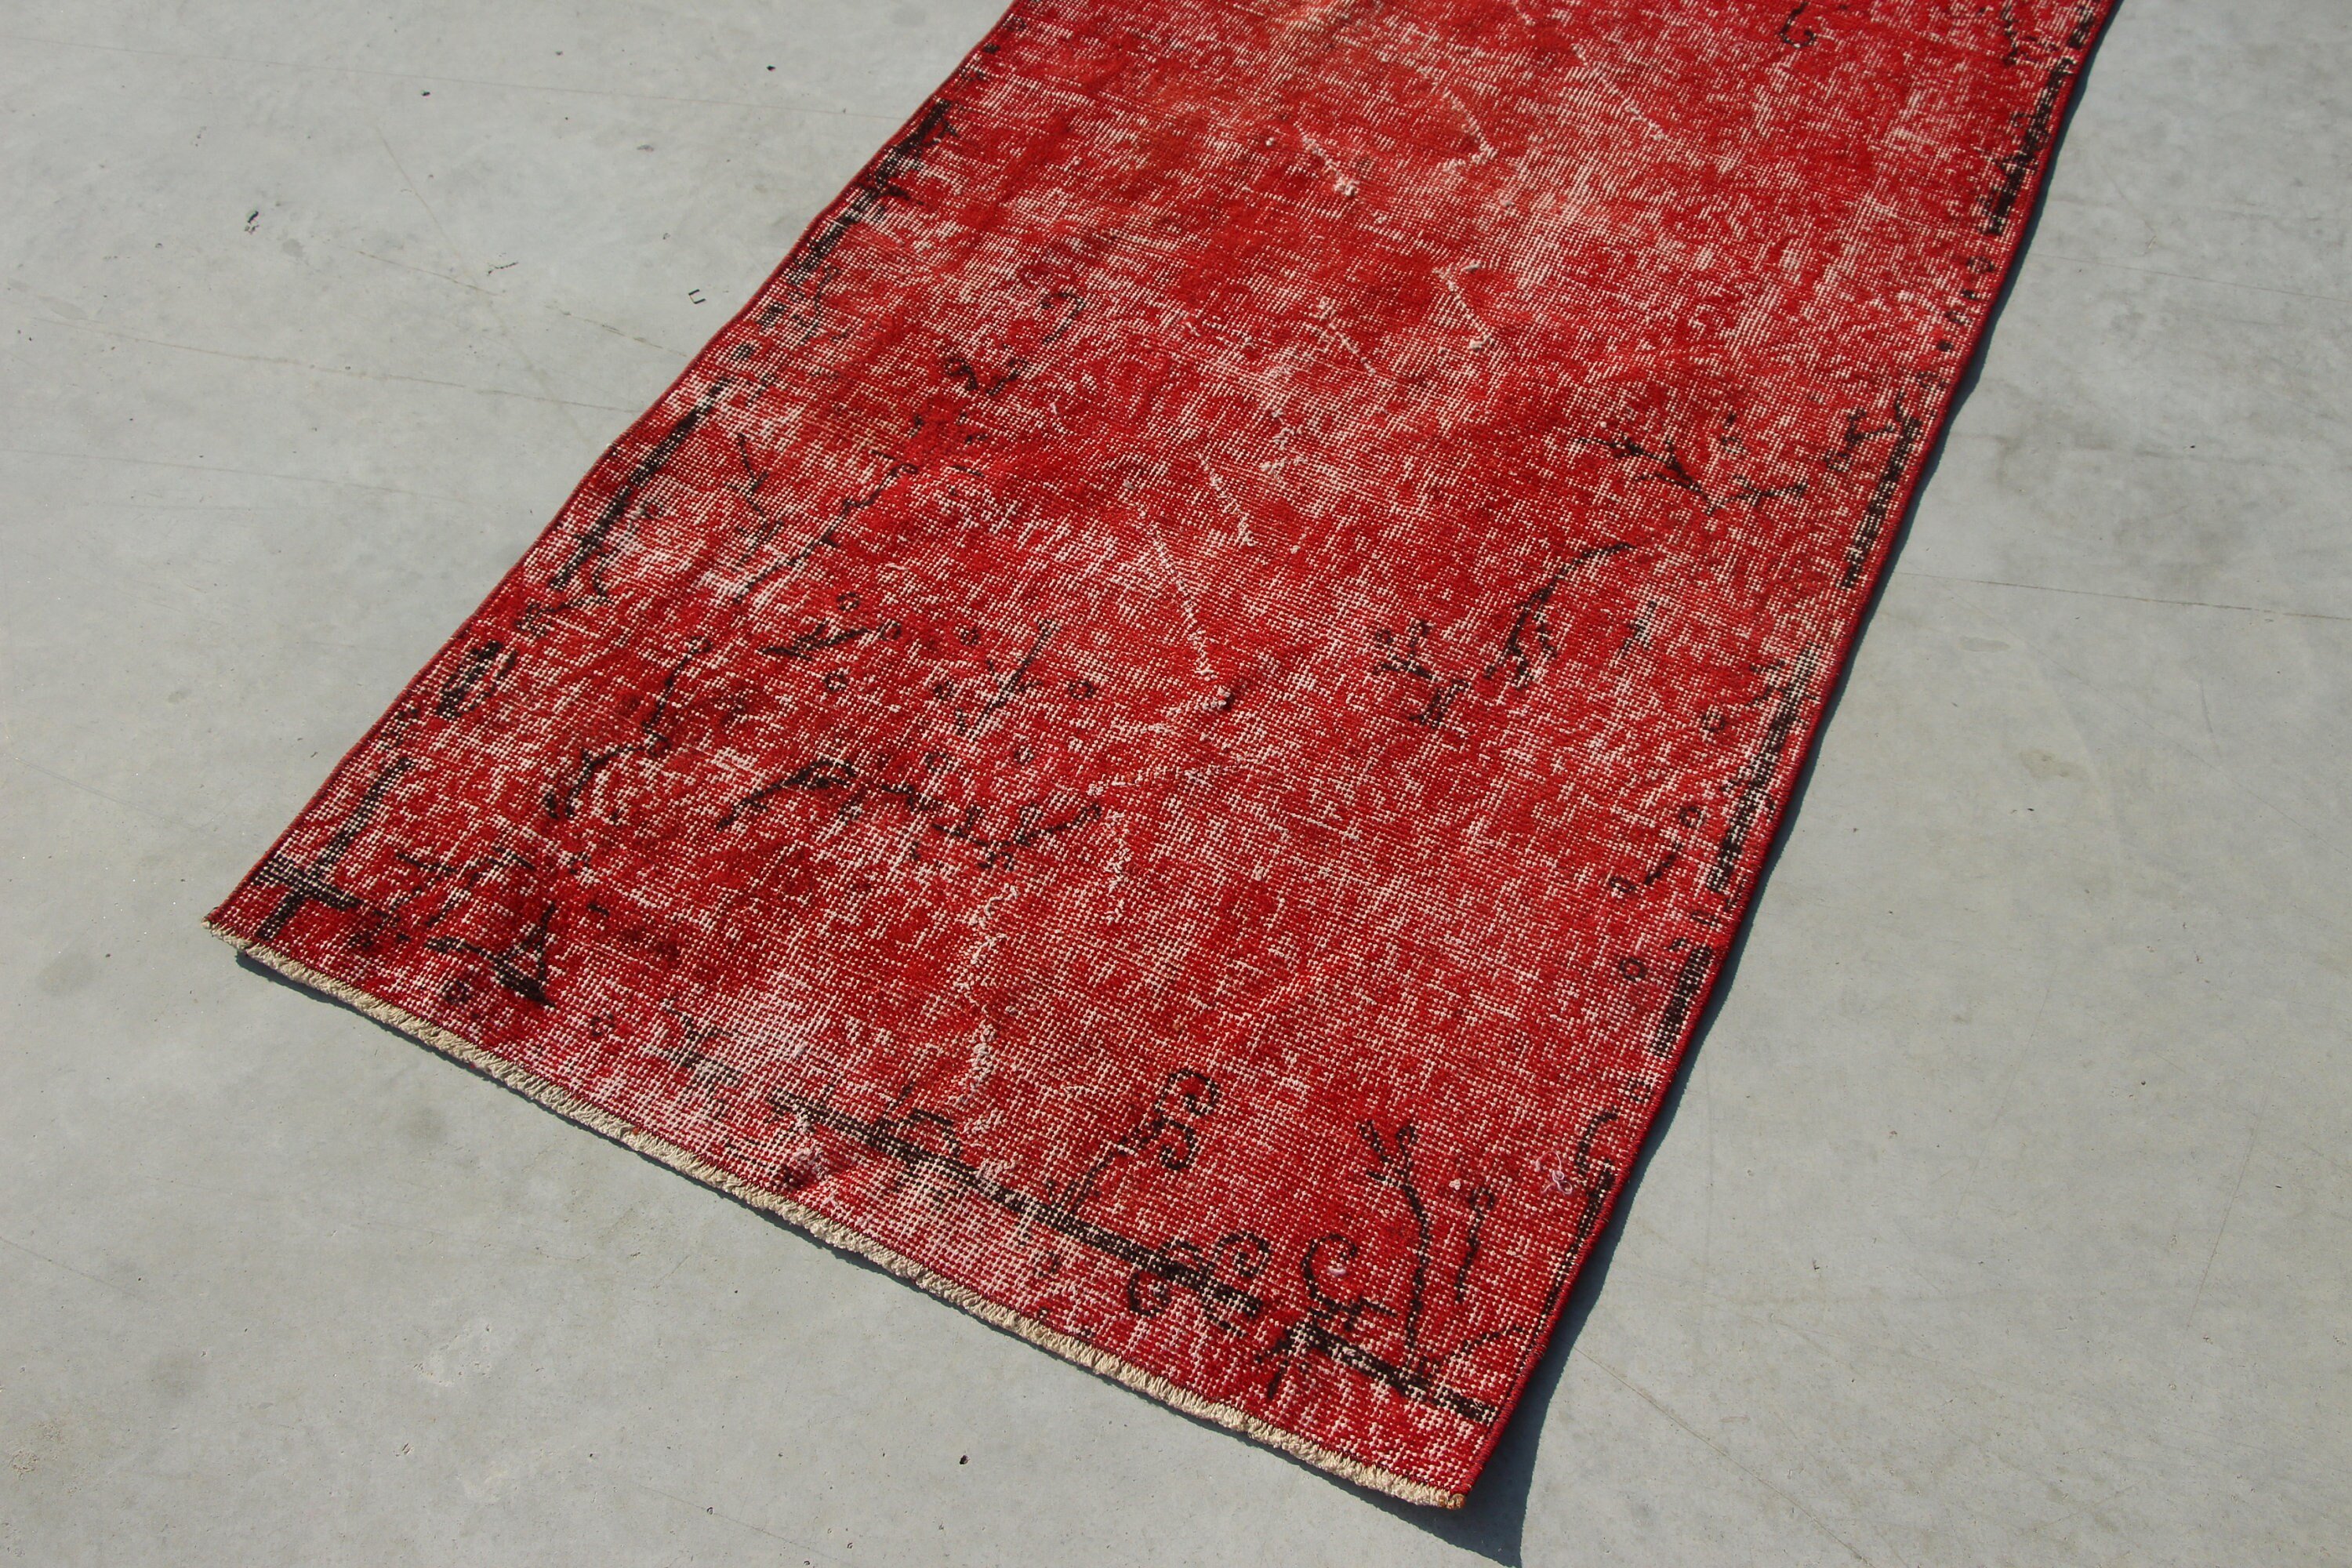 Moroccan Rug, Red Cool Rug, Abstract Rugs, Rugs for Bedroom, Kitchen Rugs, Nursery Rugs, Turkish Rug, Vintage Rugs, 2.9x6.7 ft Accent Rugs